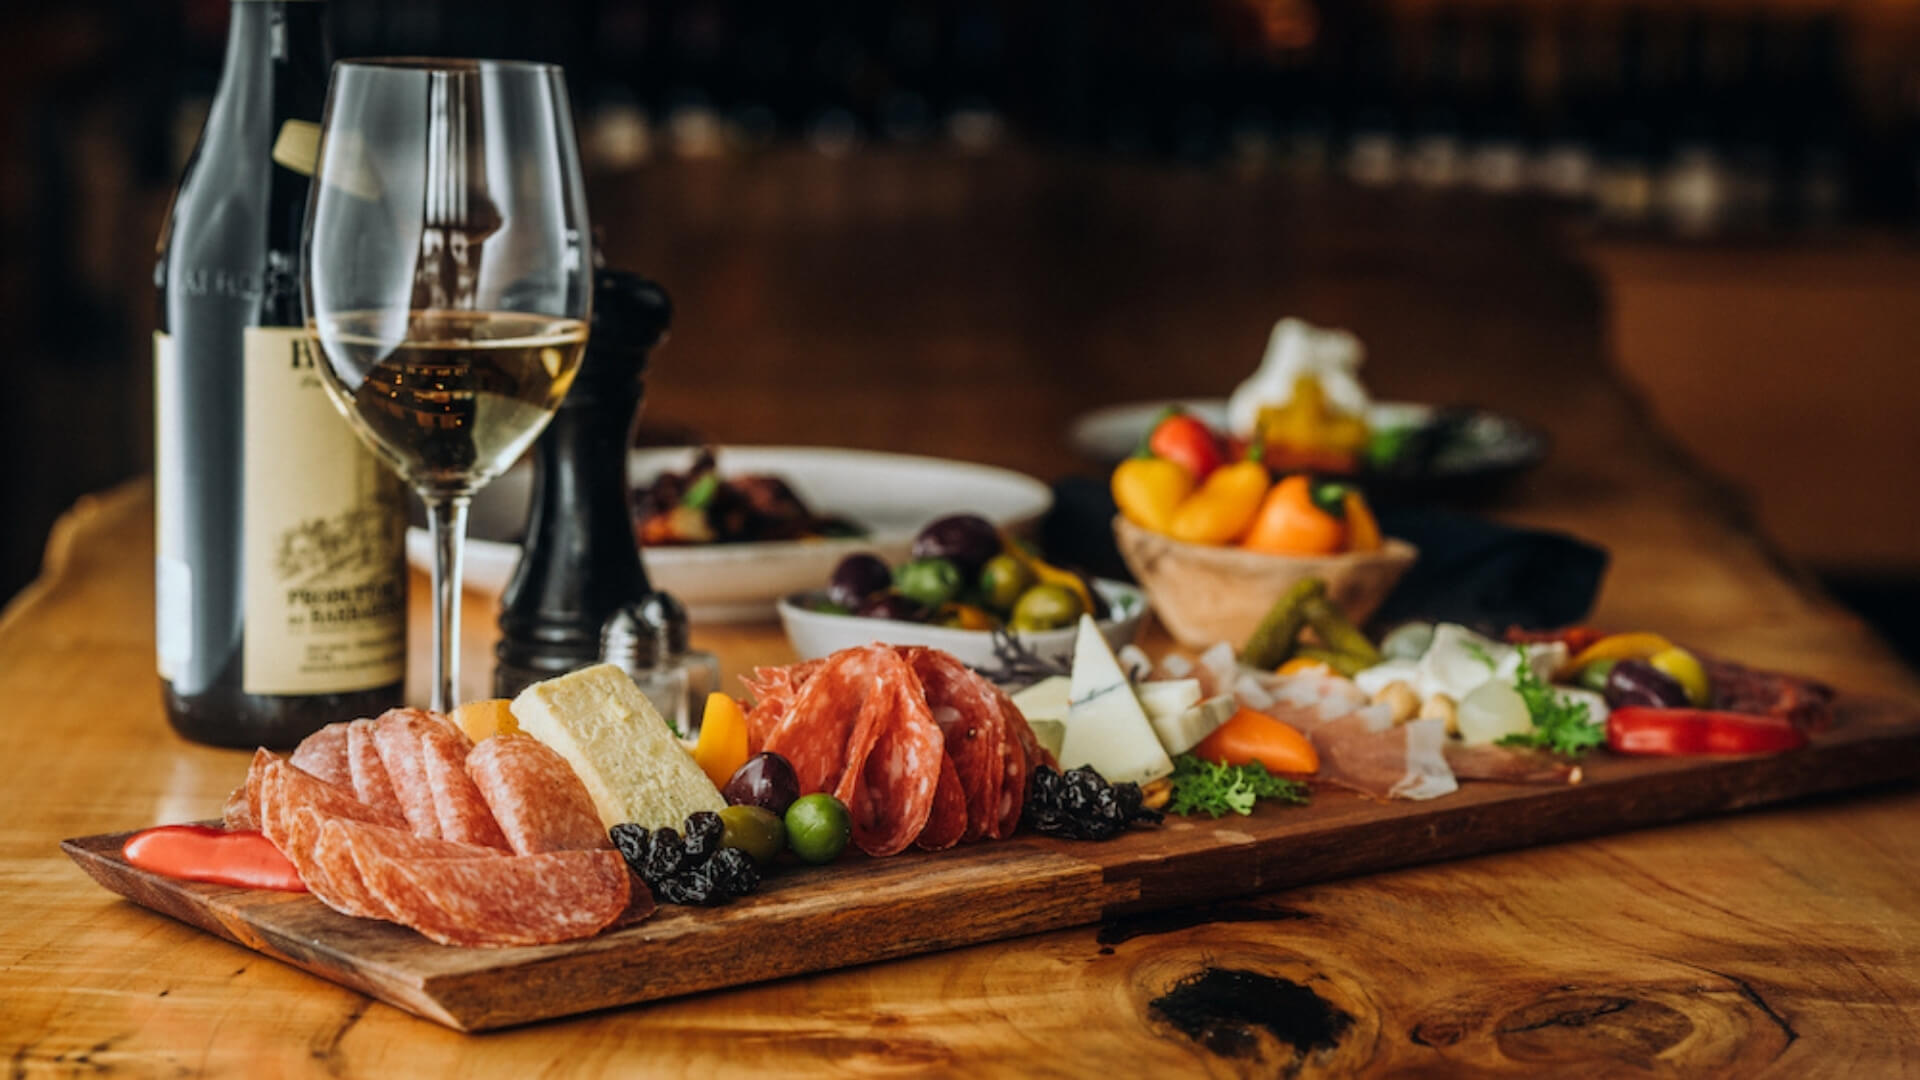 Foxcroft Wine and charcuterie 